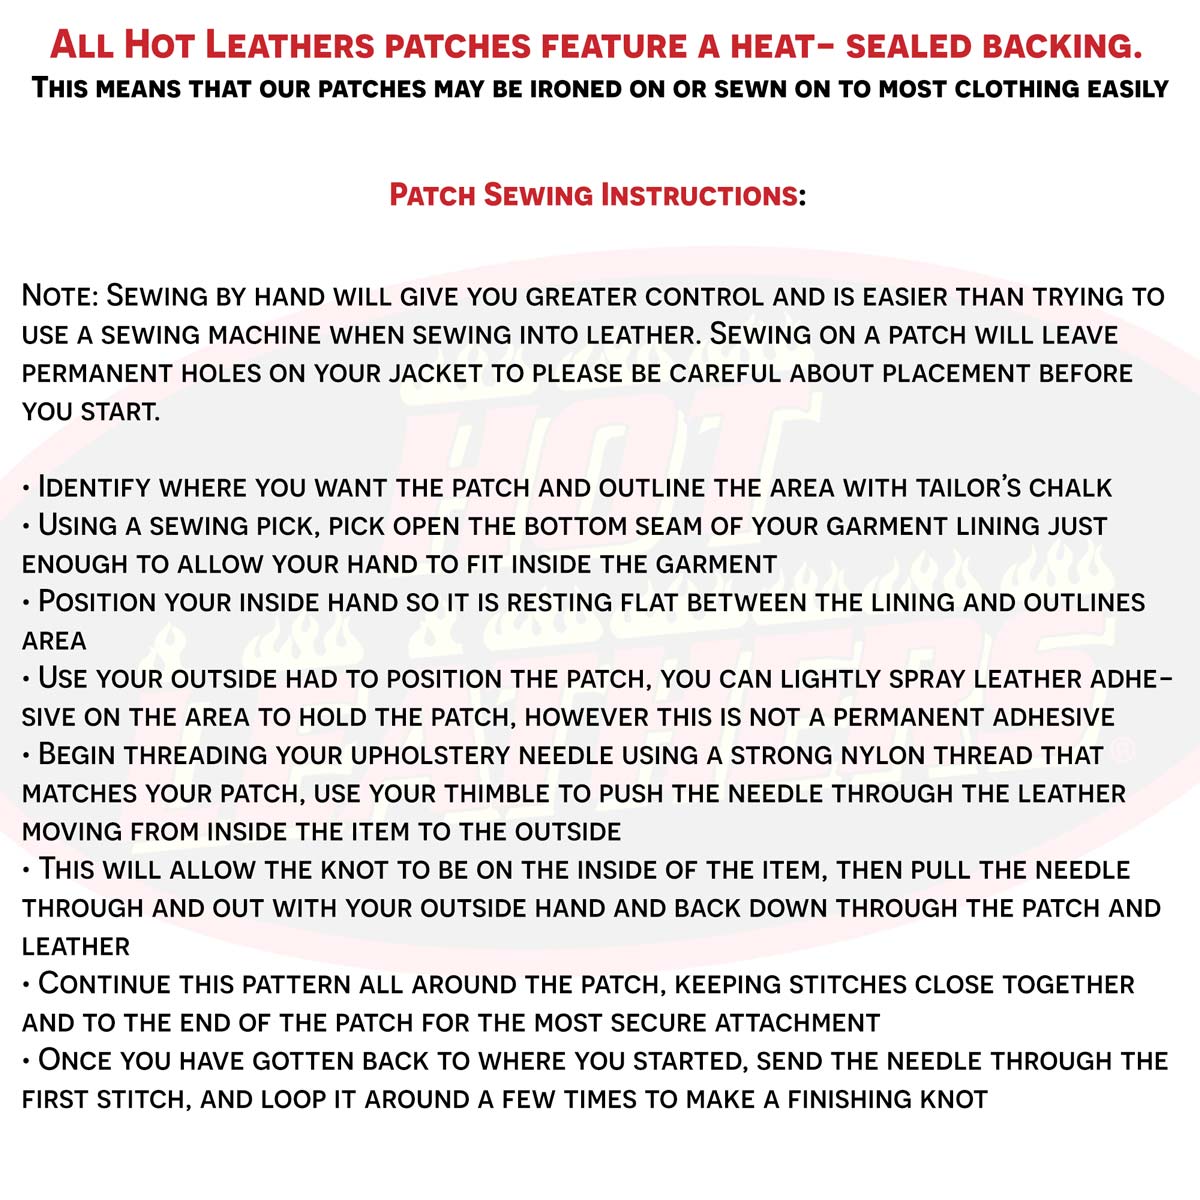 Hot Leathers F*** Around - Find Out 12” X 3” Top Rocker Patch PPM4167